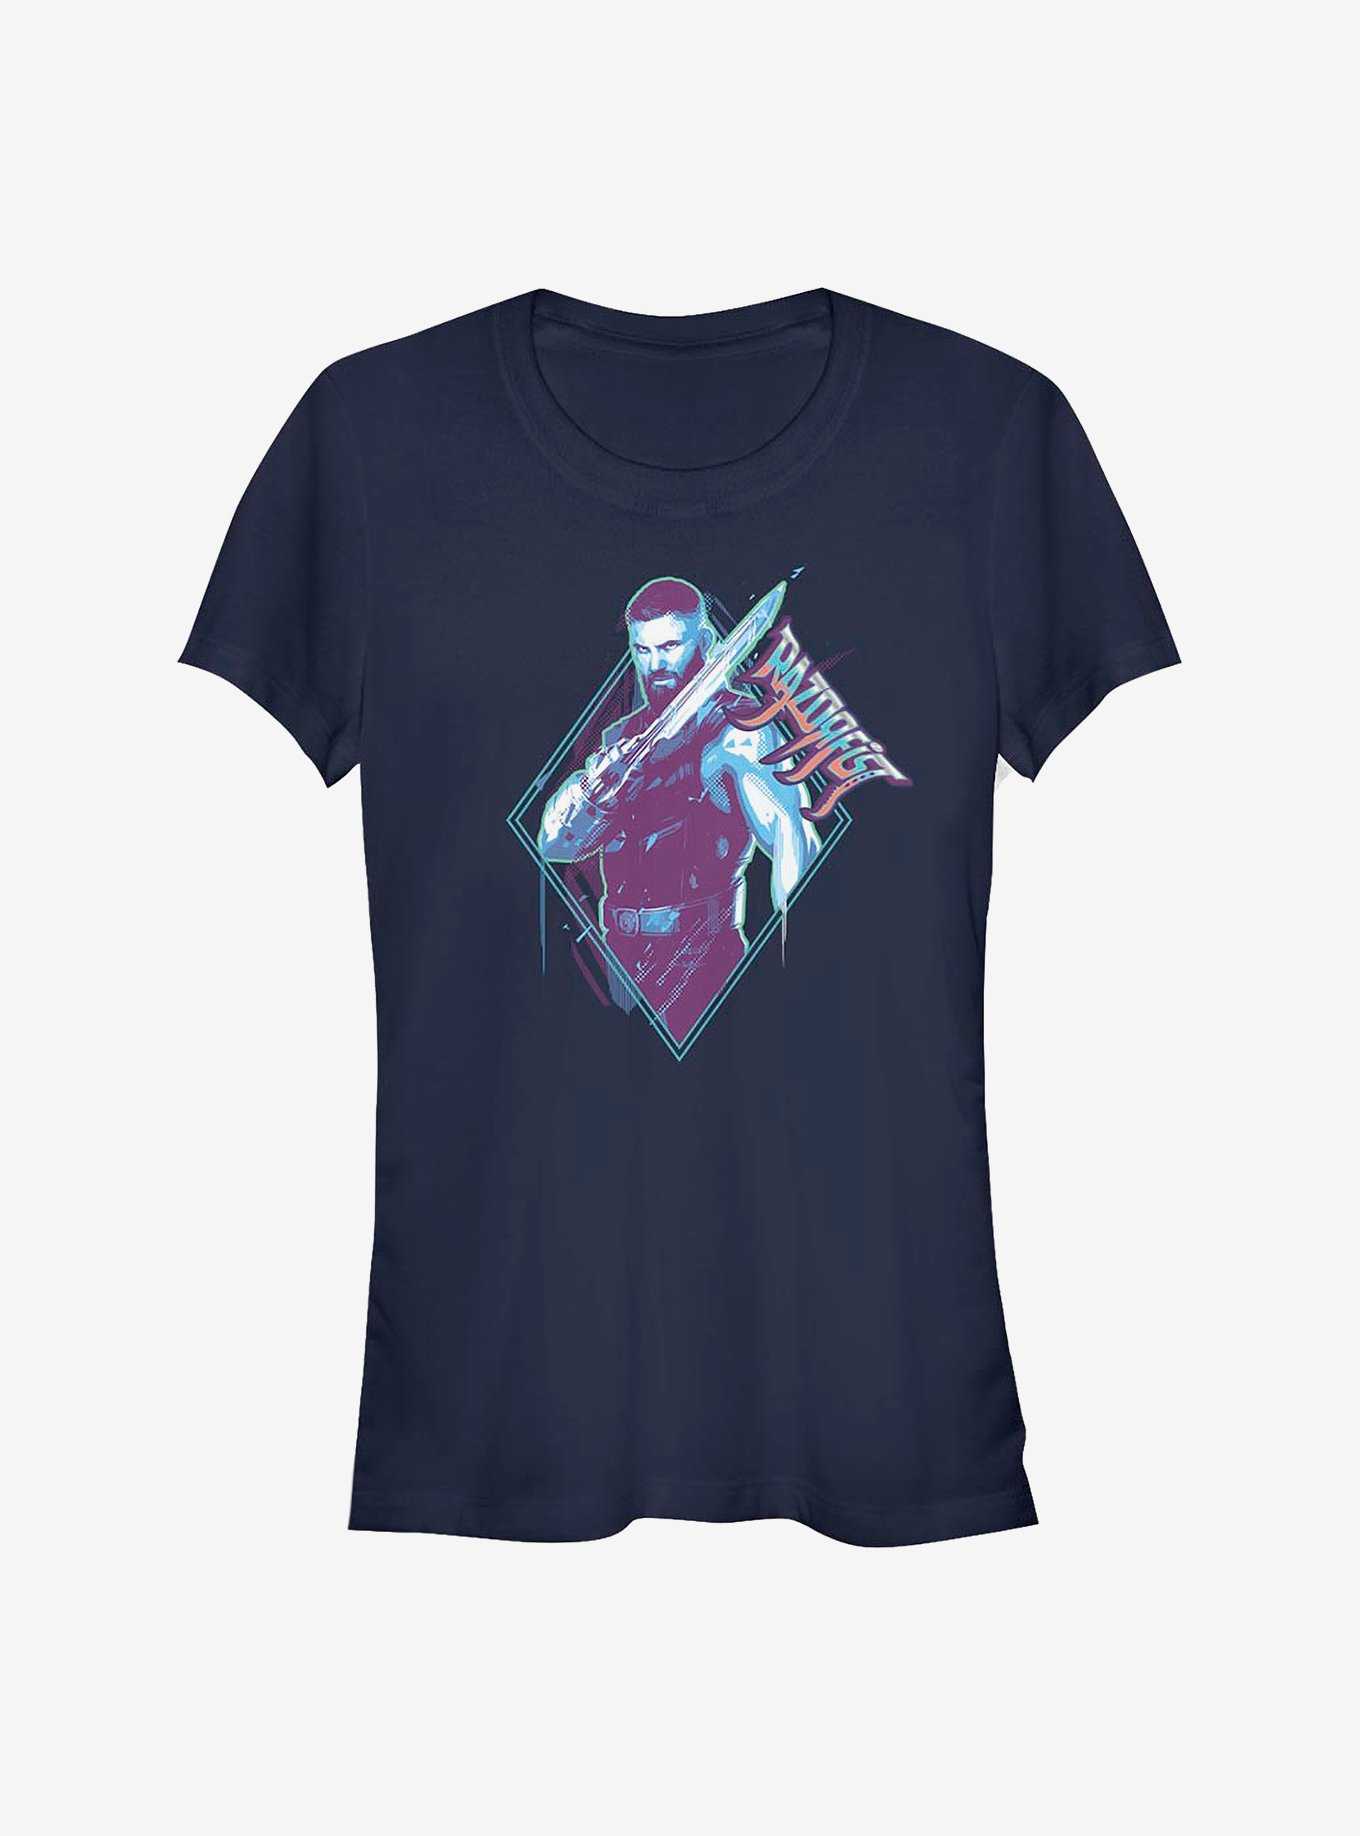 Marvel Shang-Chi And The Legend Of The Ten Rings Razorfist Badge Girls T-Shirt, , hi-res